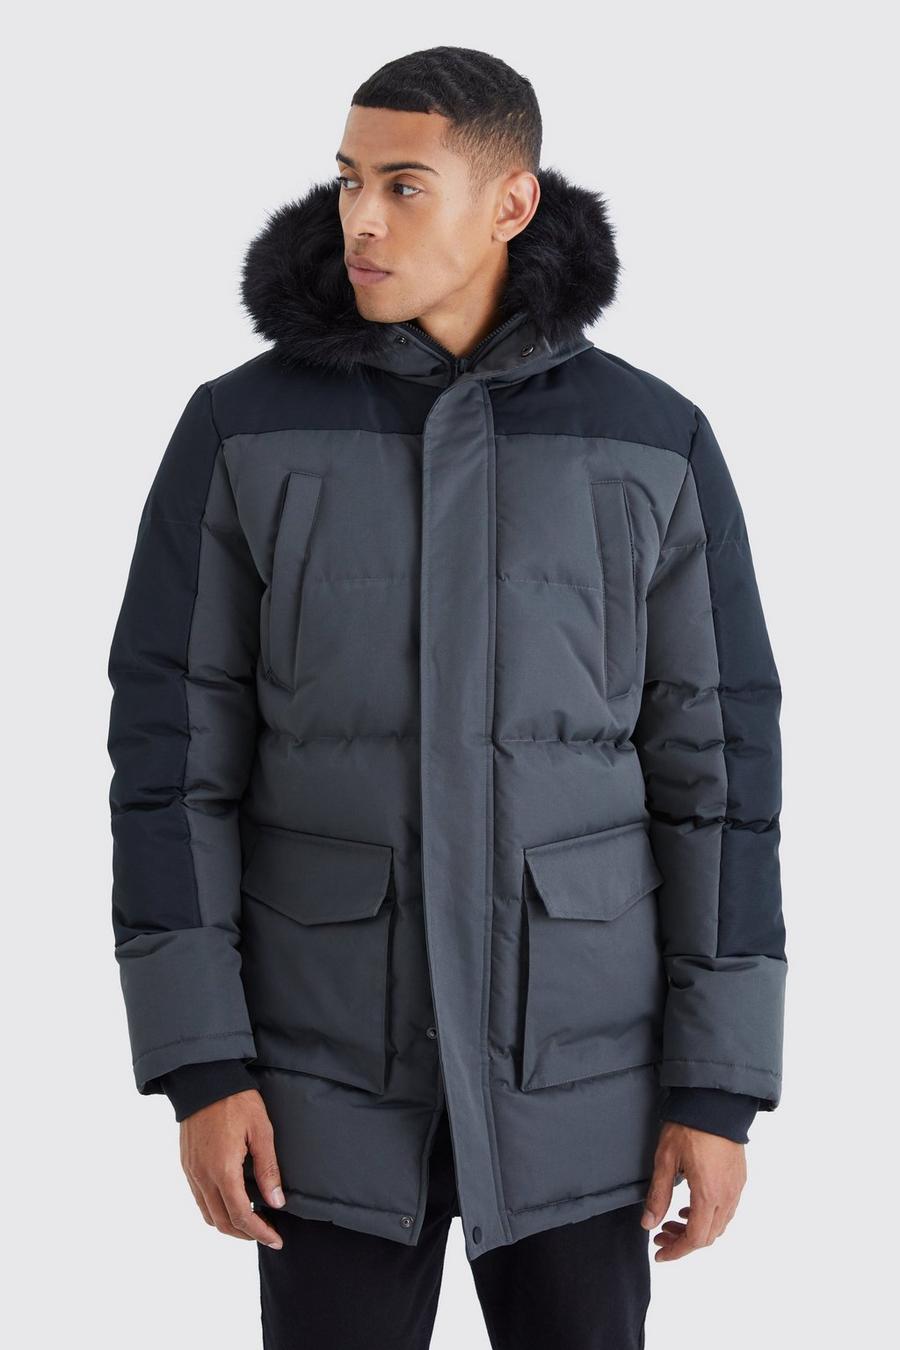 Charcoal grigio Colour Block Hooded Puffer Parka